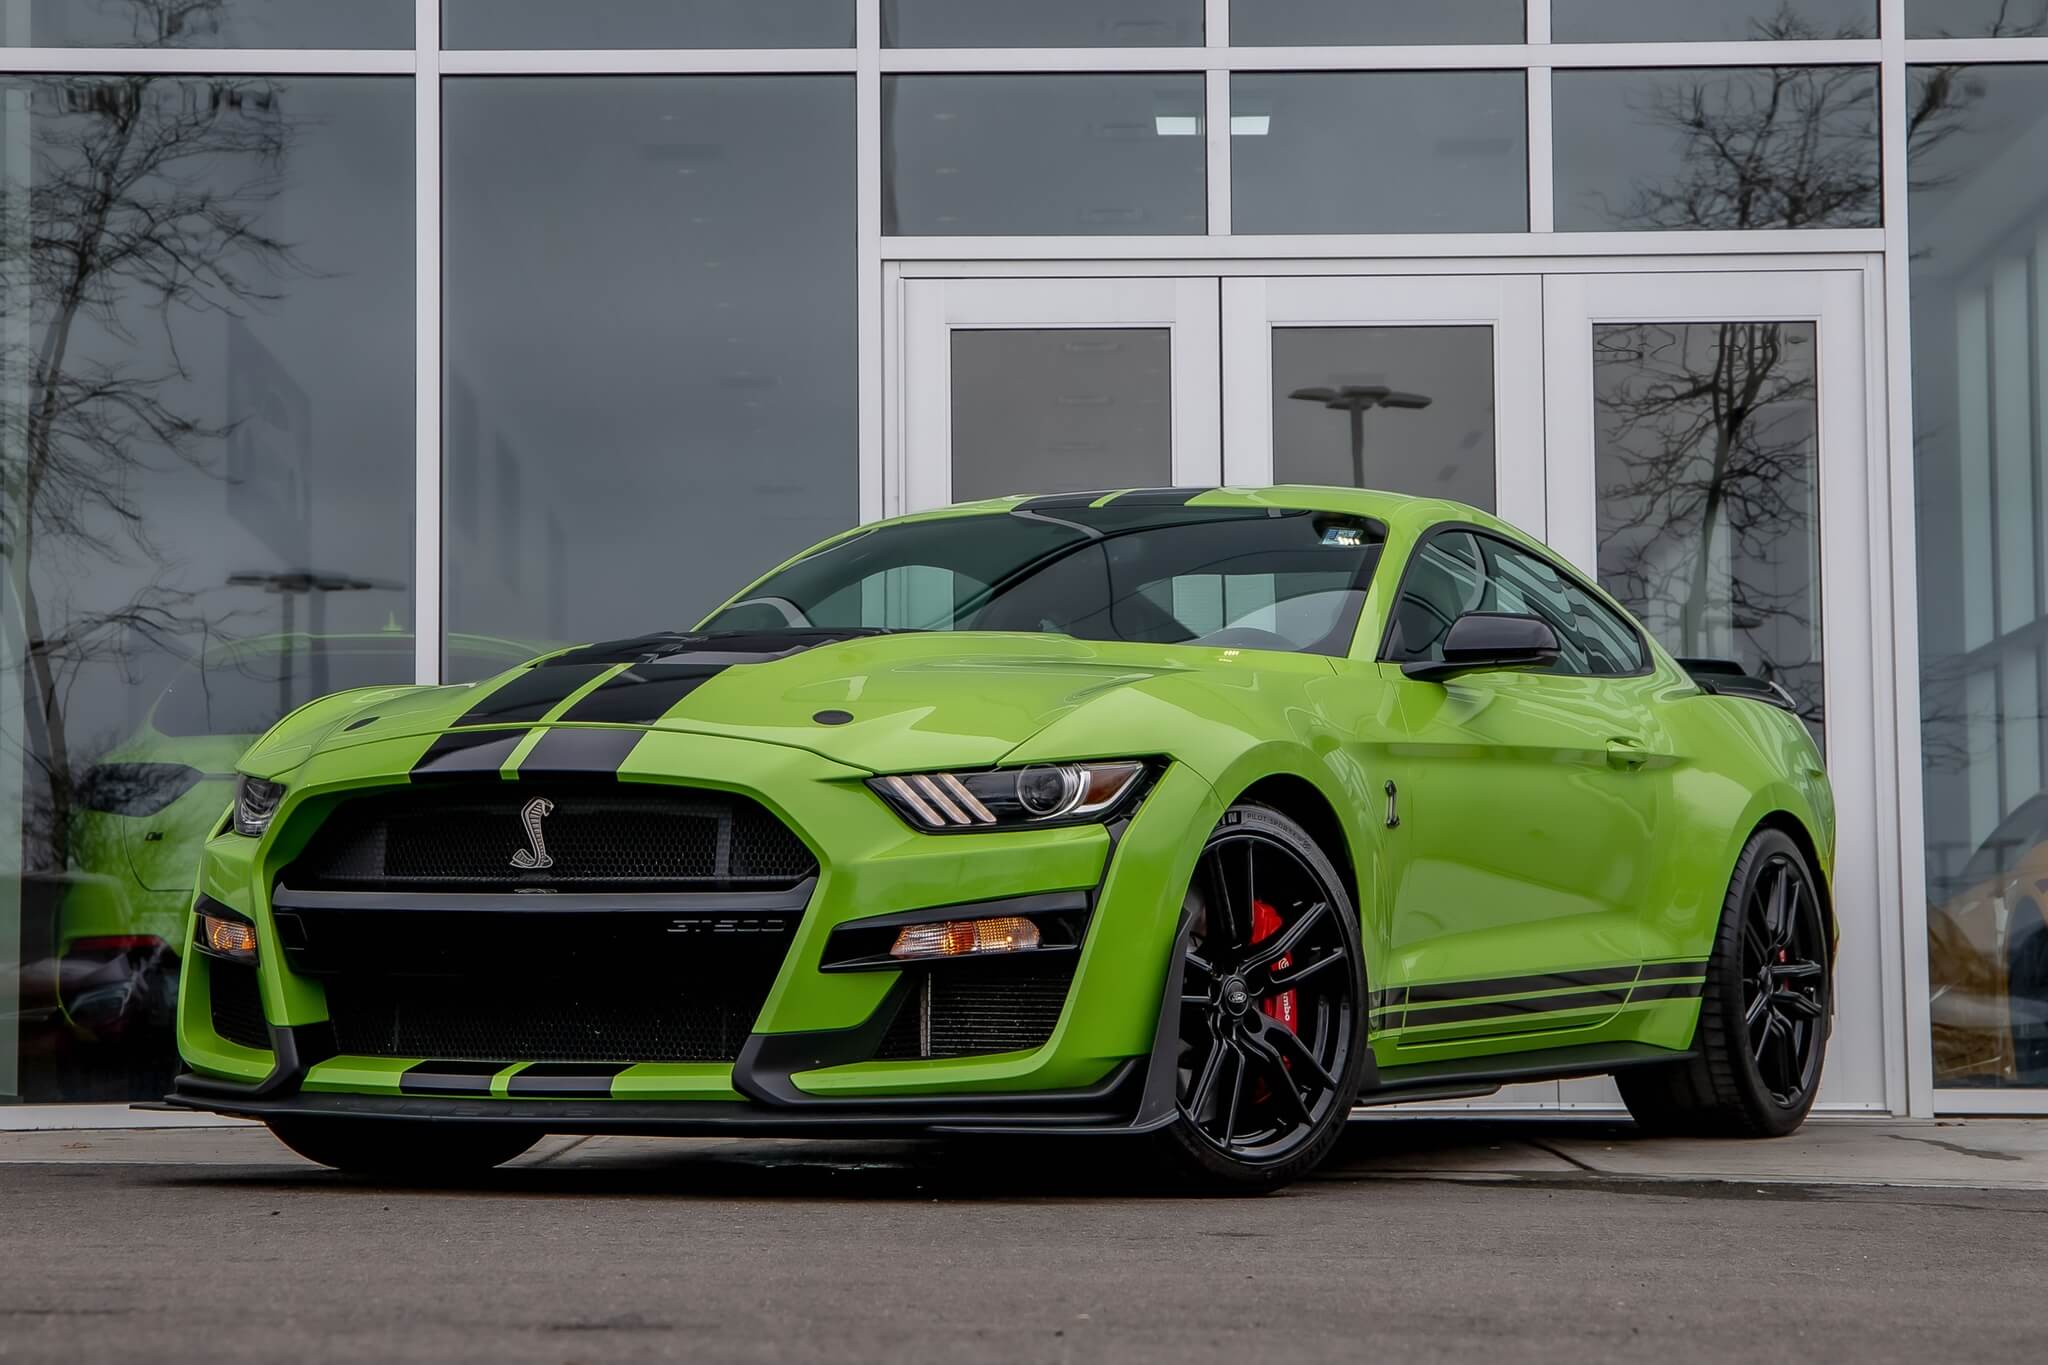 6k-Mile 2020 Ford Mustang GT500